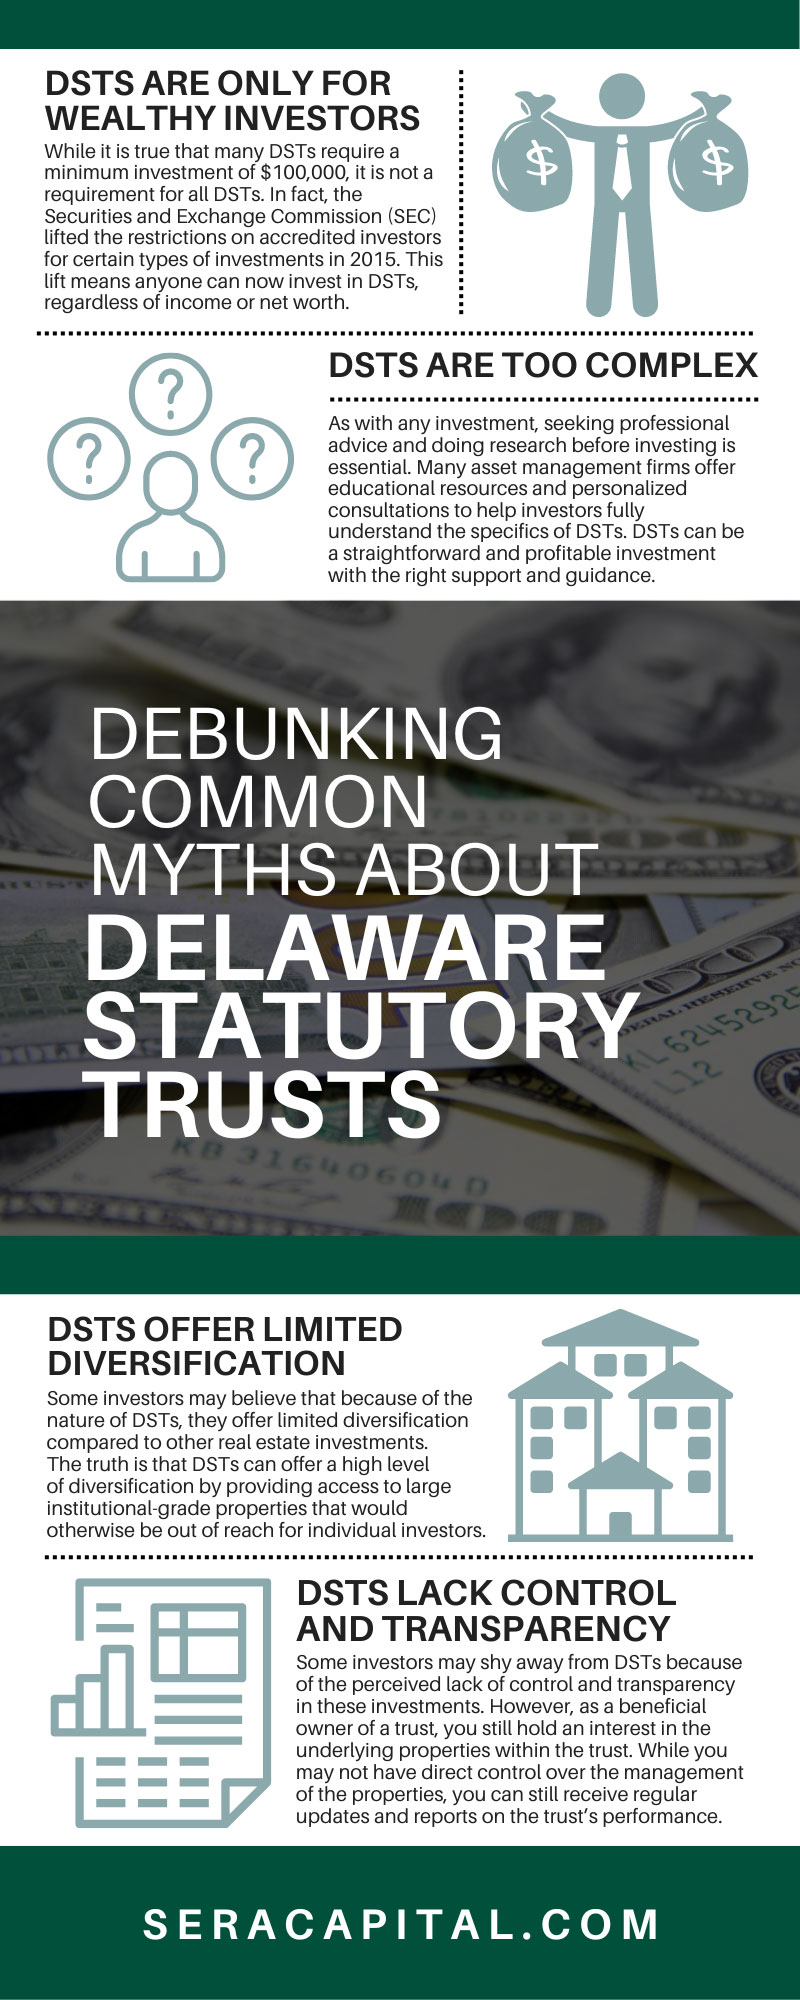 Debunking Common Myths About Delaware Statutory Trusts 